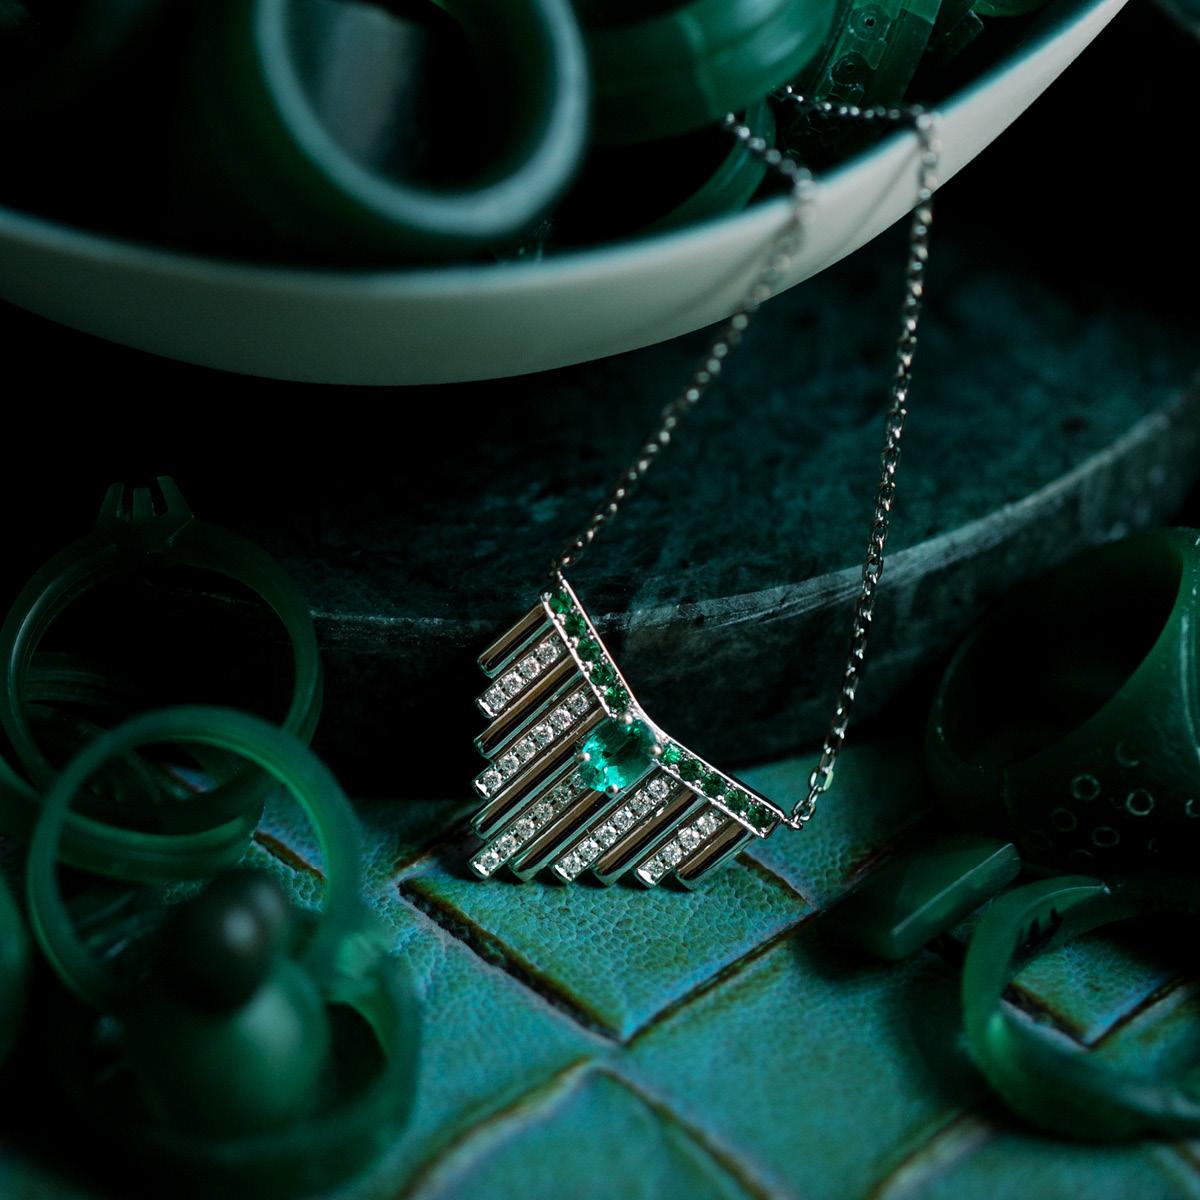 19.2K white gold pendant necklace with 26 brilliant cut diamonds with 0.21 ct., 10 tsavorites with 0.22 ct. and 1 6x4 oval emerald with 0.42 ct.

This ring is parte of Monseo 'Neo Deco' collection, This collection has several Art Deco inspired